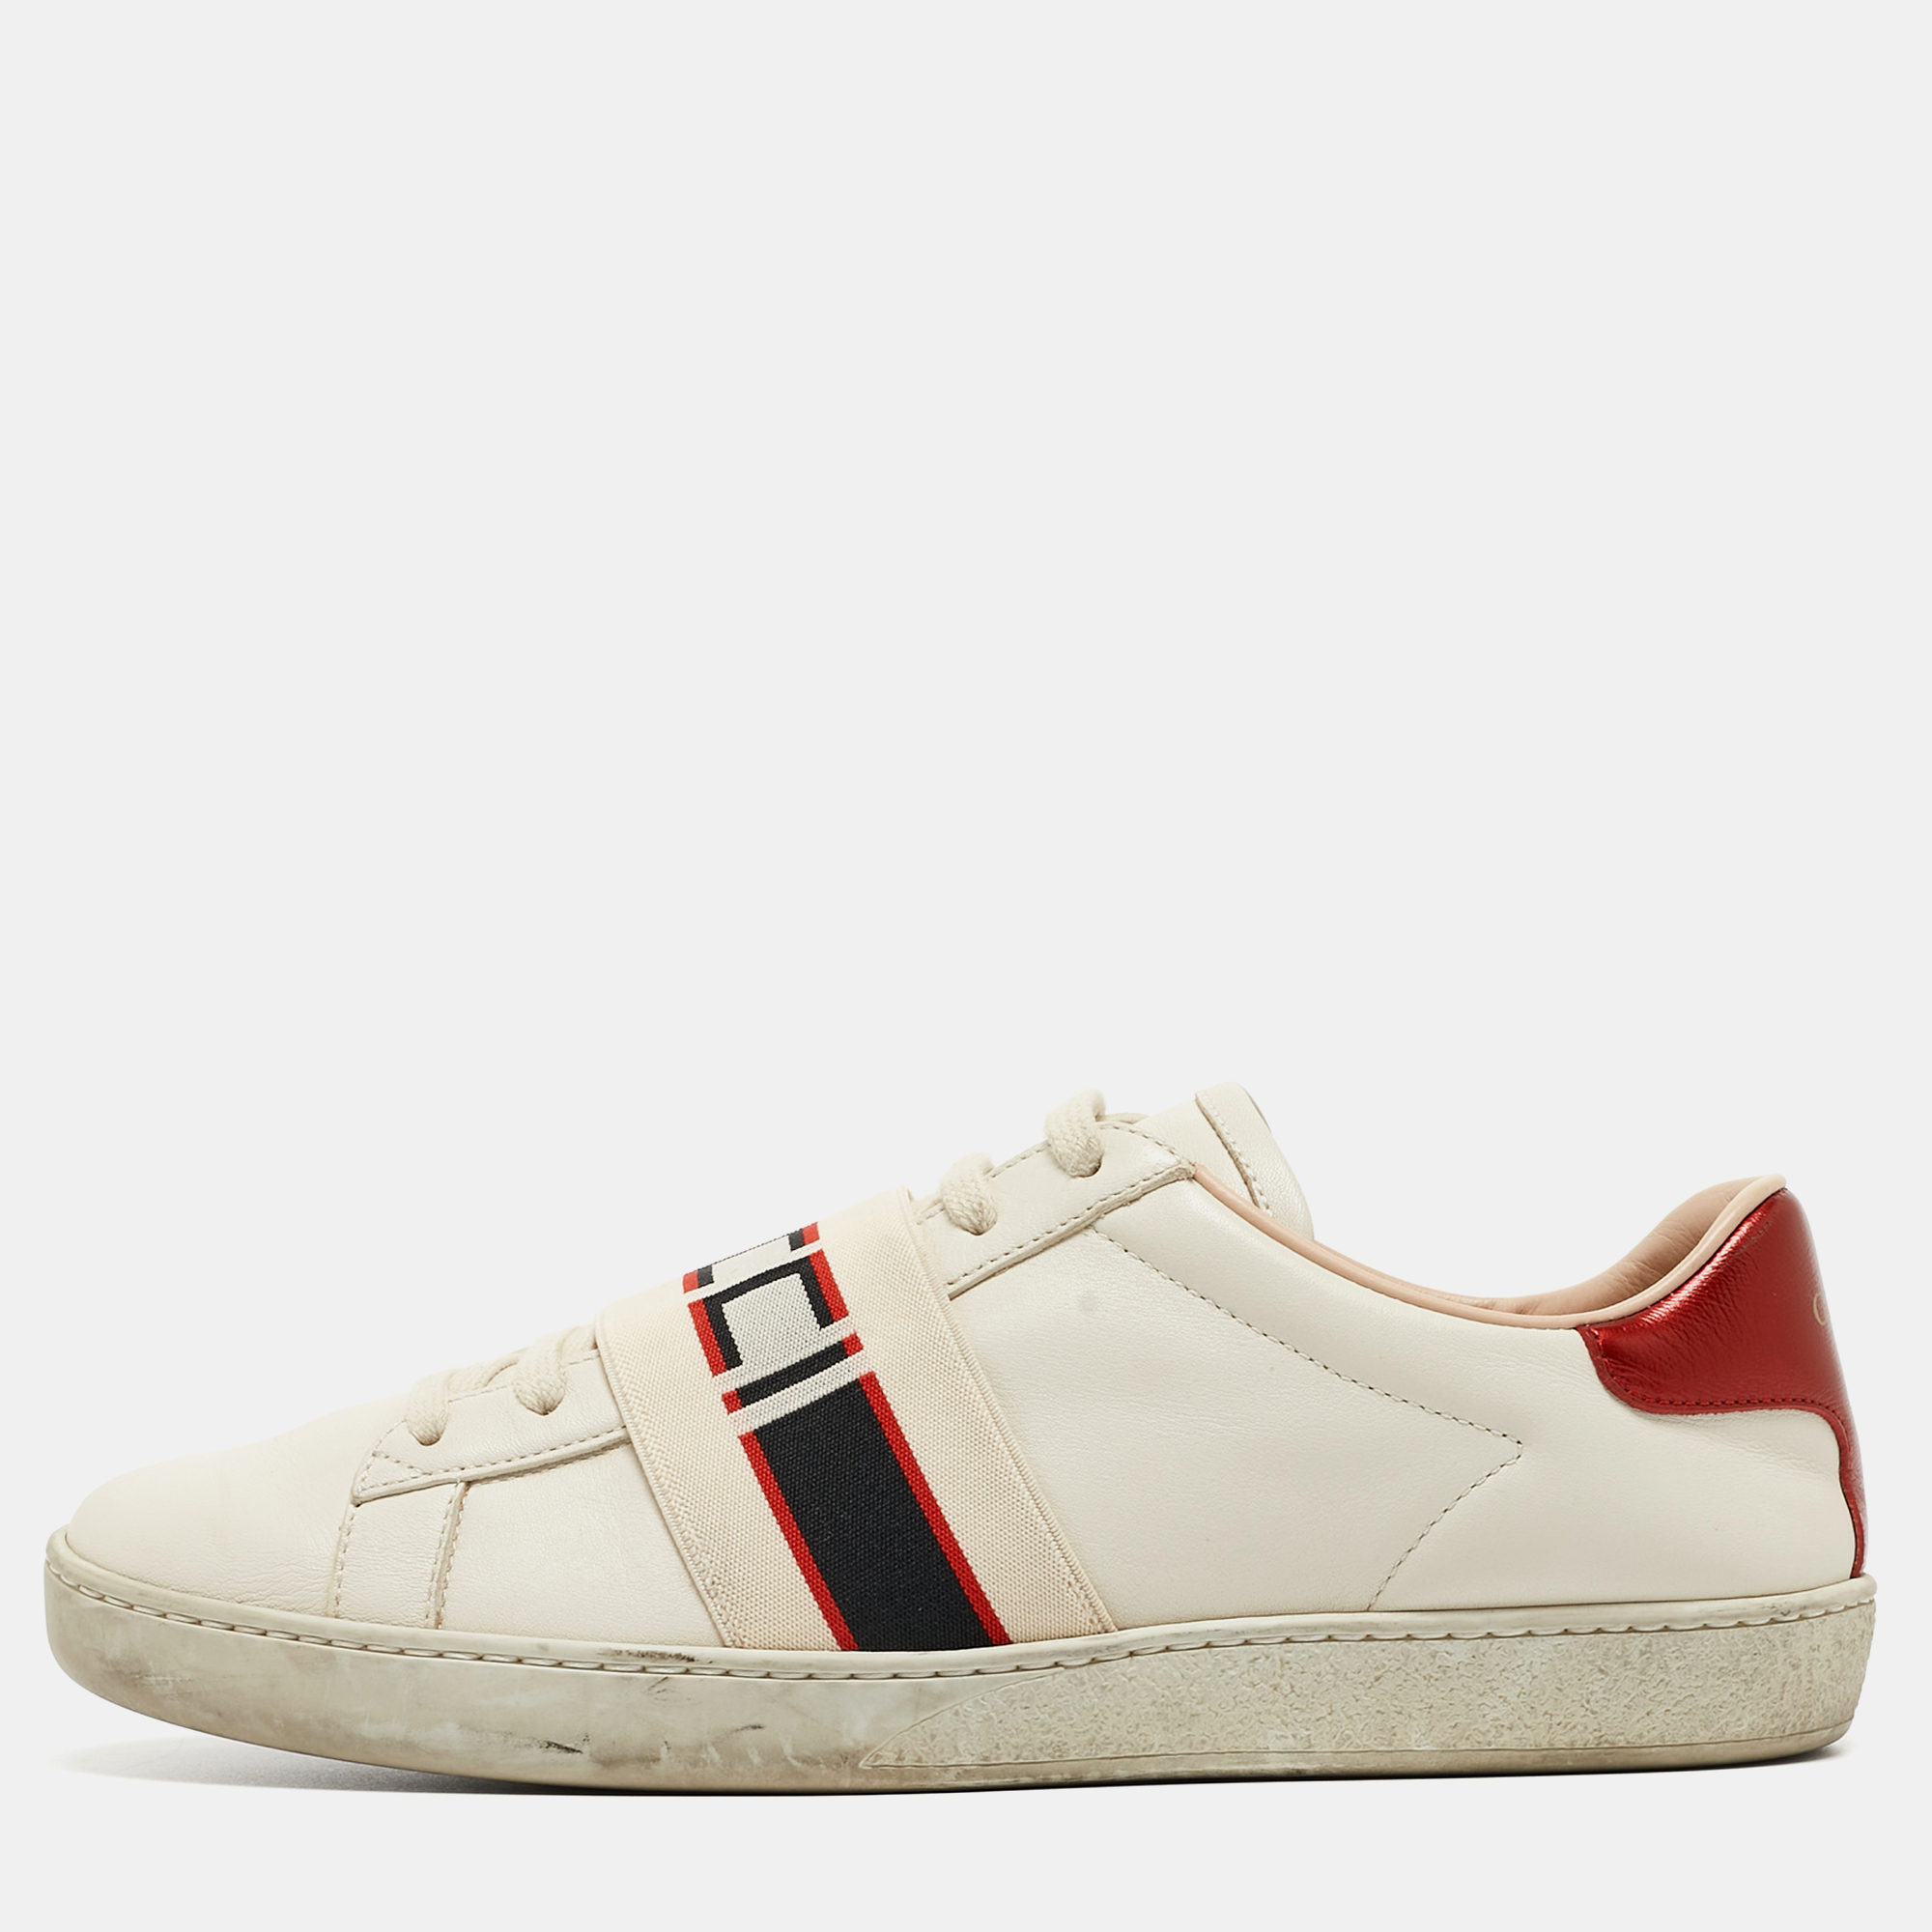 Pre-owned Gucci Off White/red Leather Ace Stripe Trainers Size 39